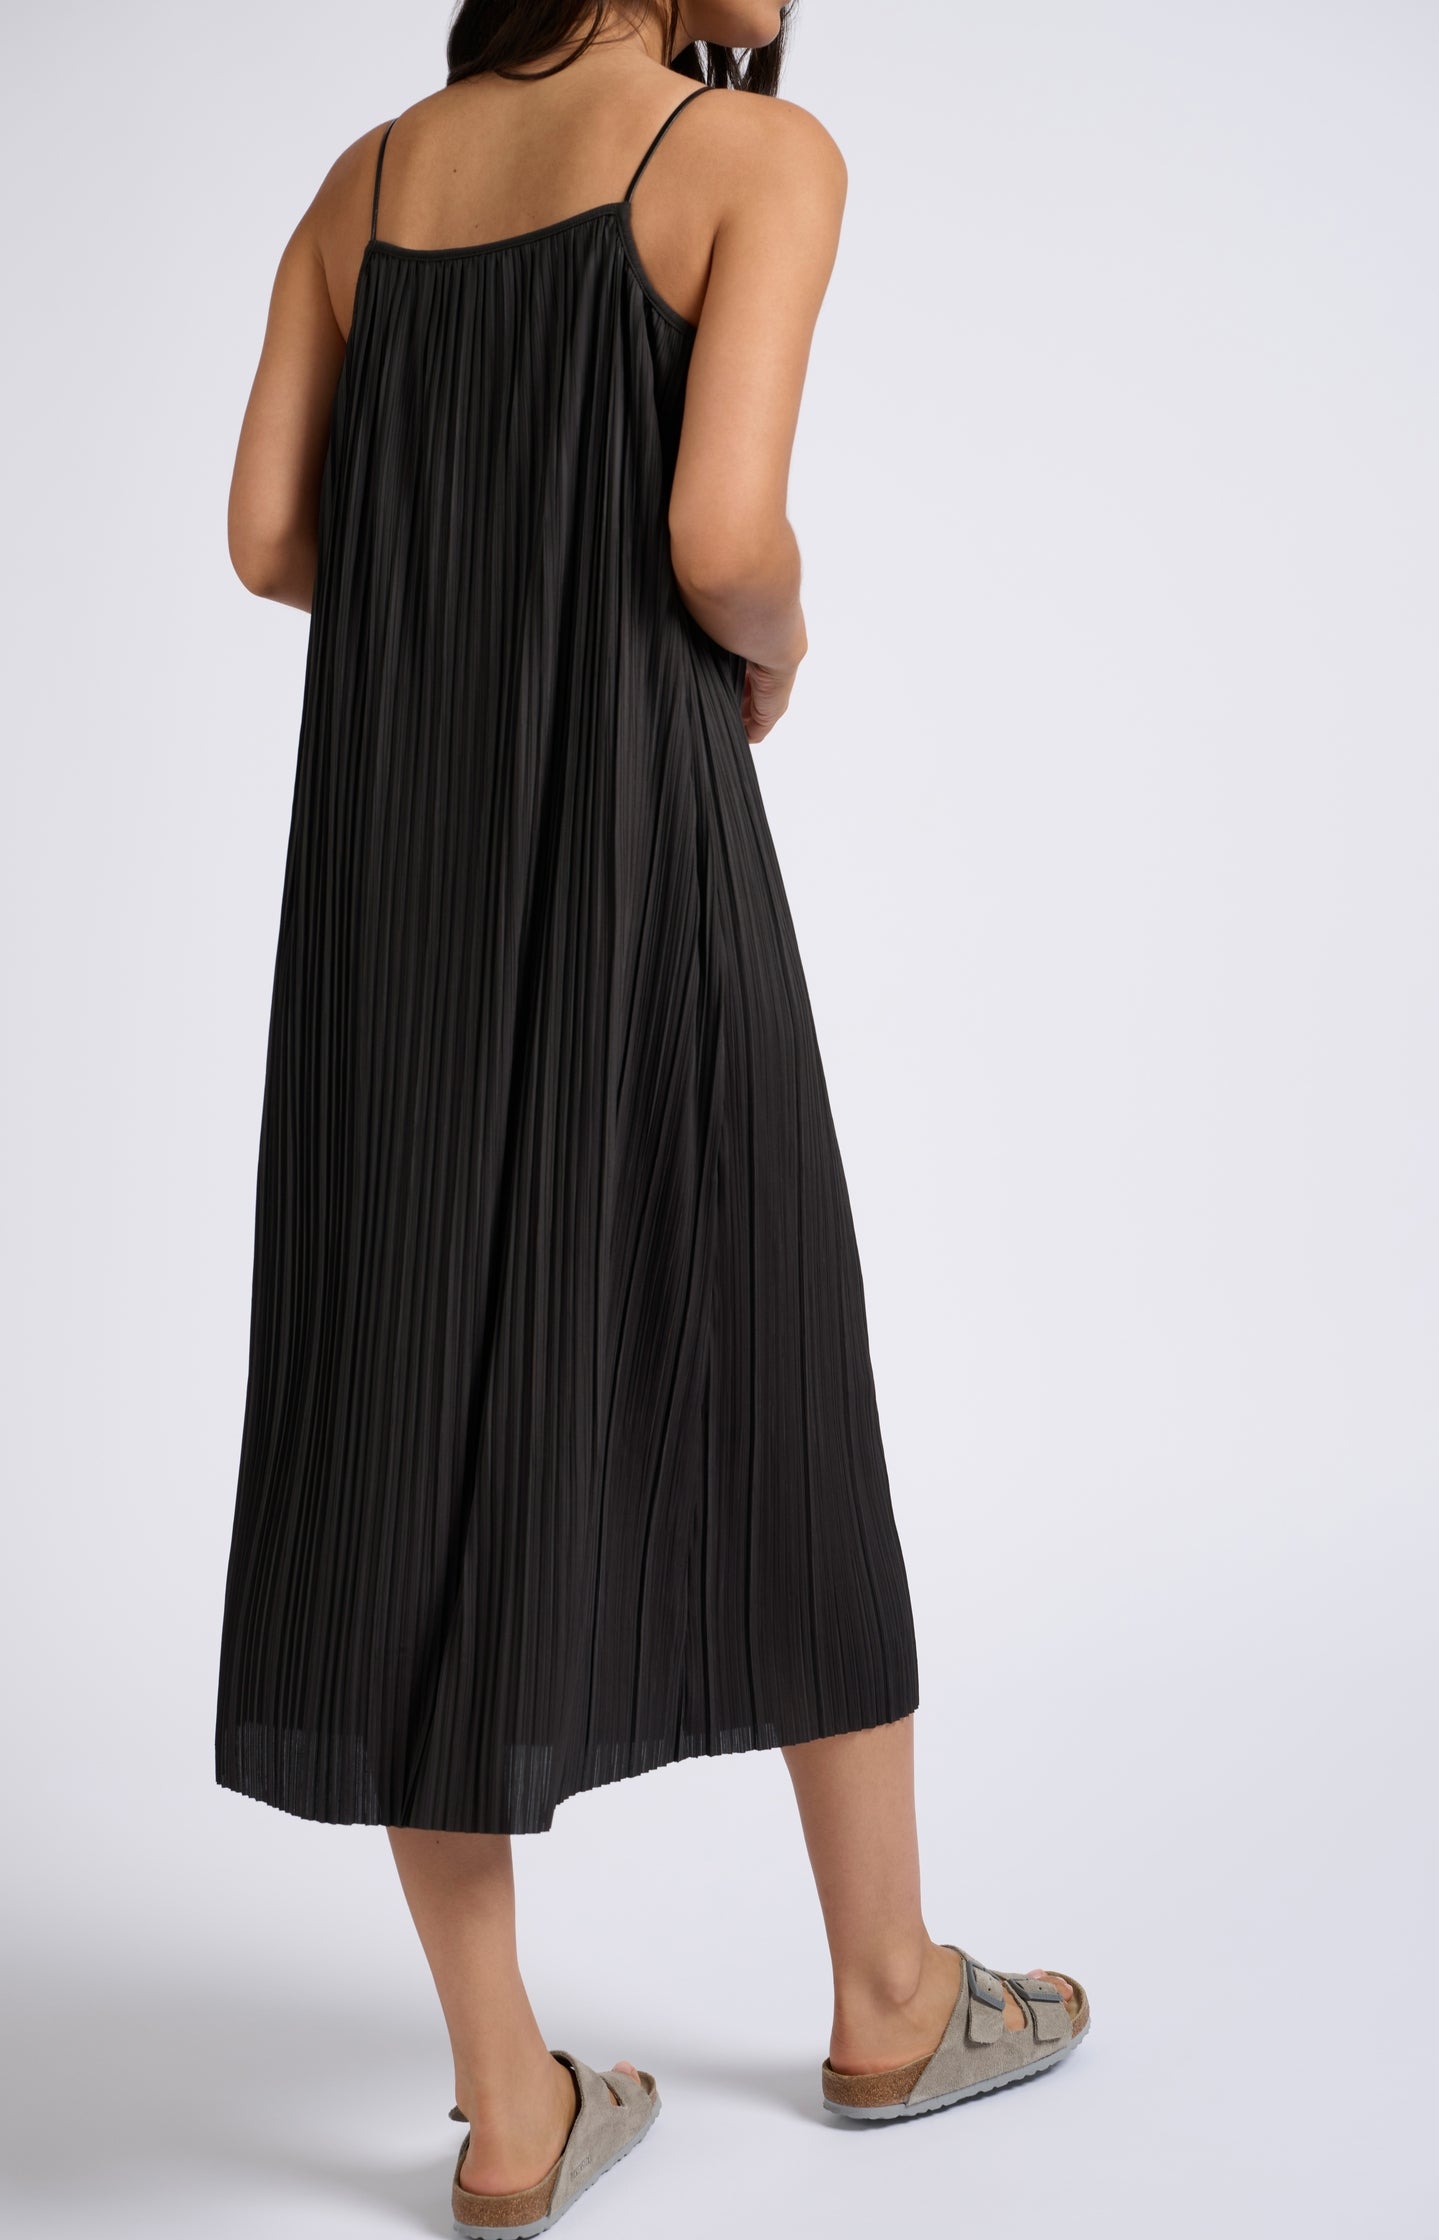 Jersey plisse dress with thin straps in flowy fit - Licorice Black